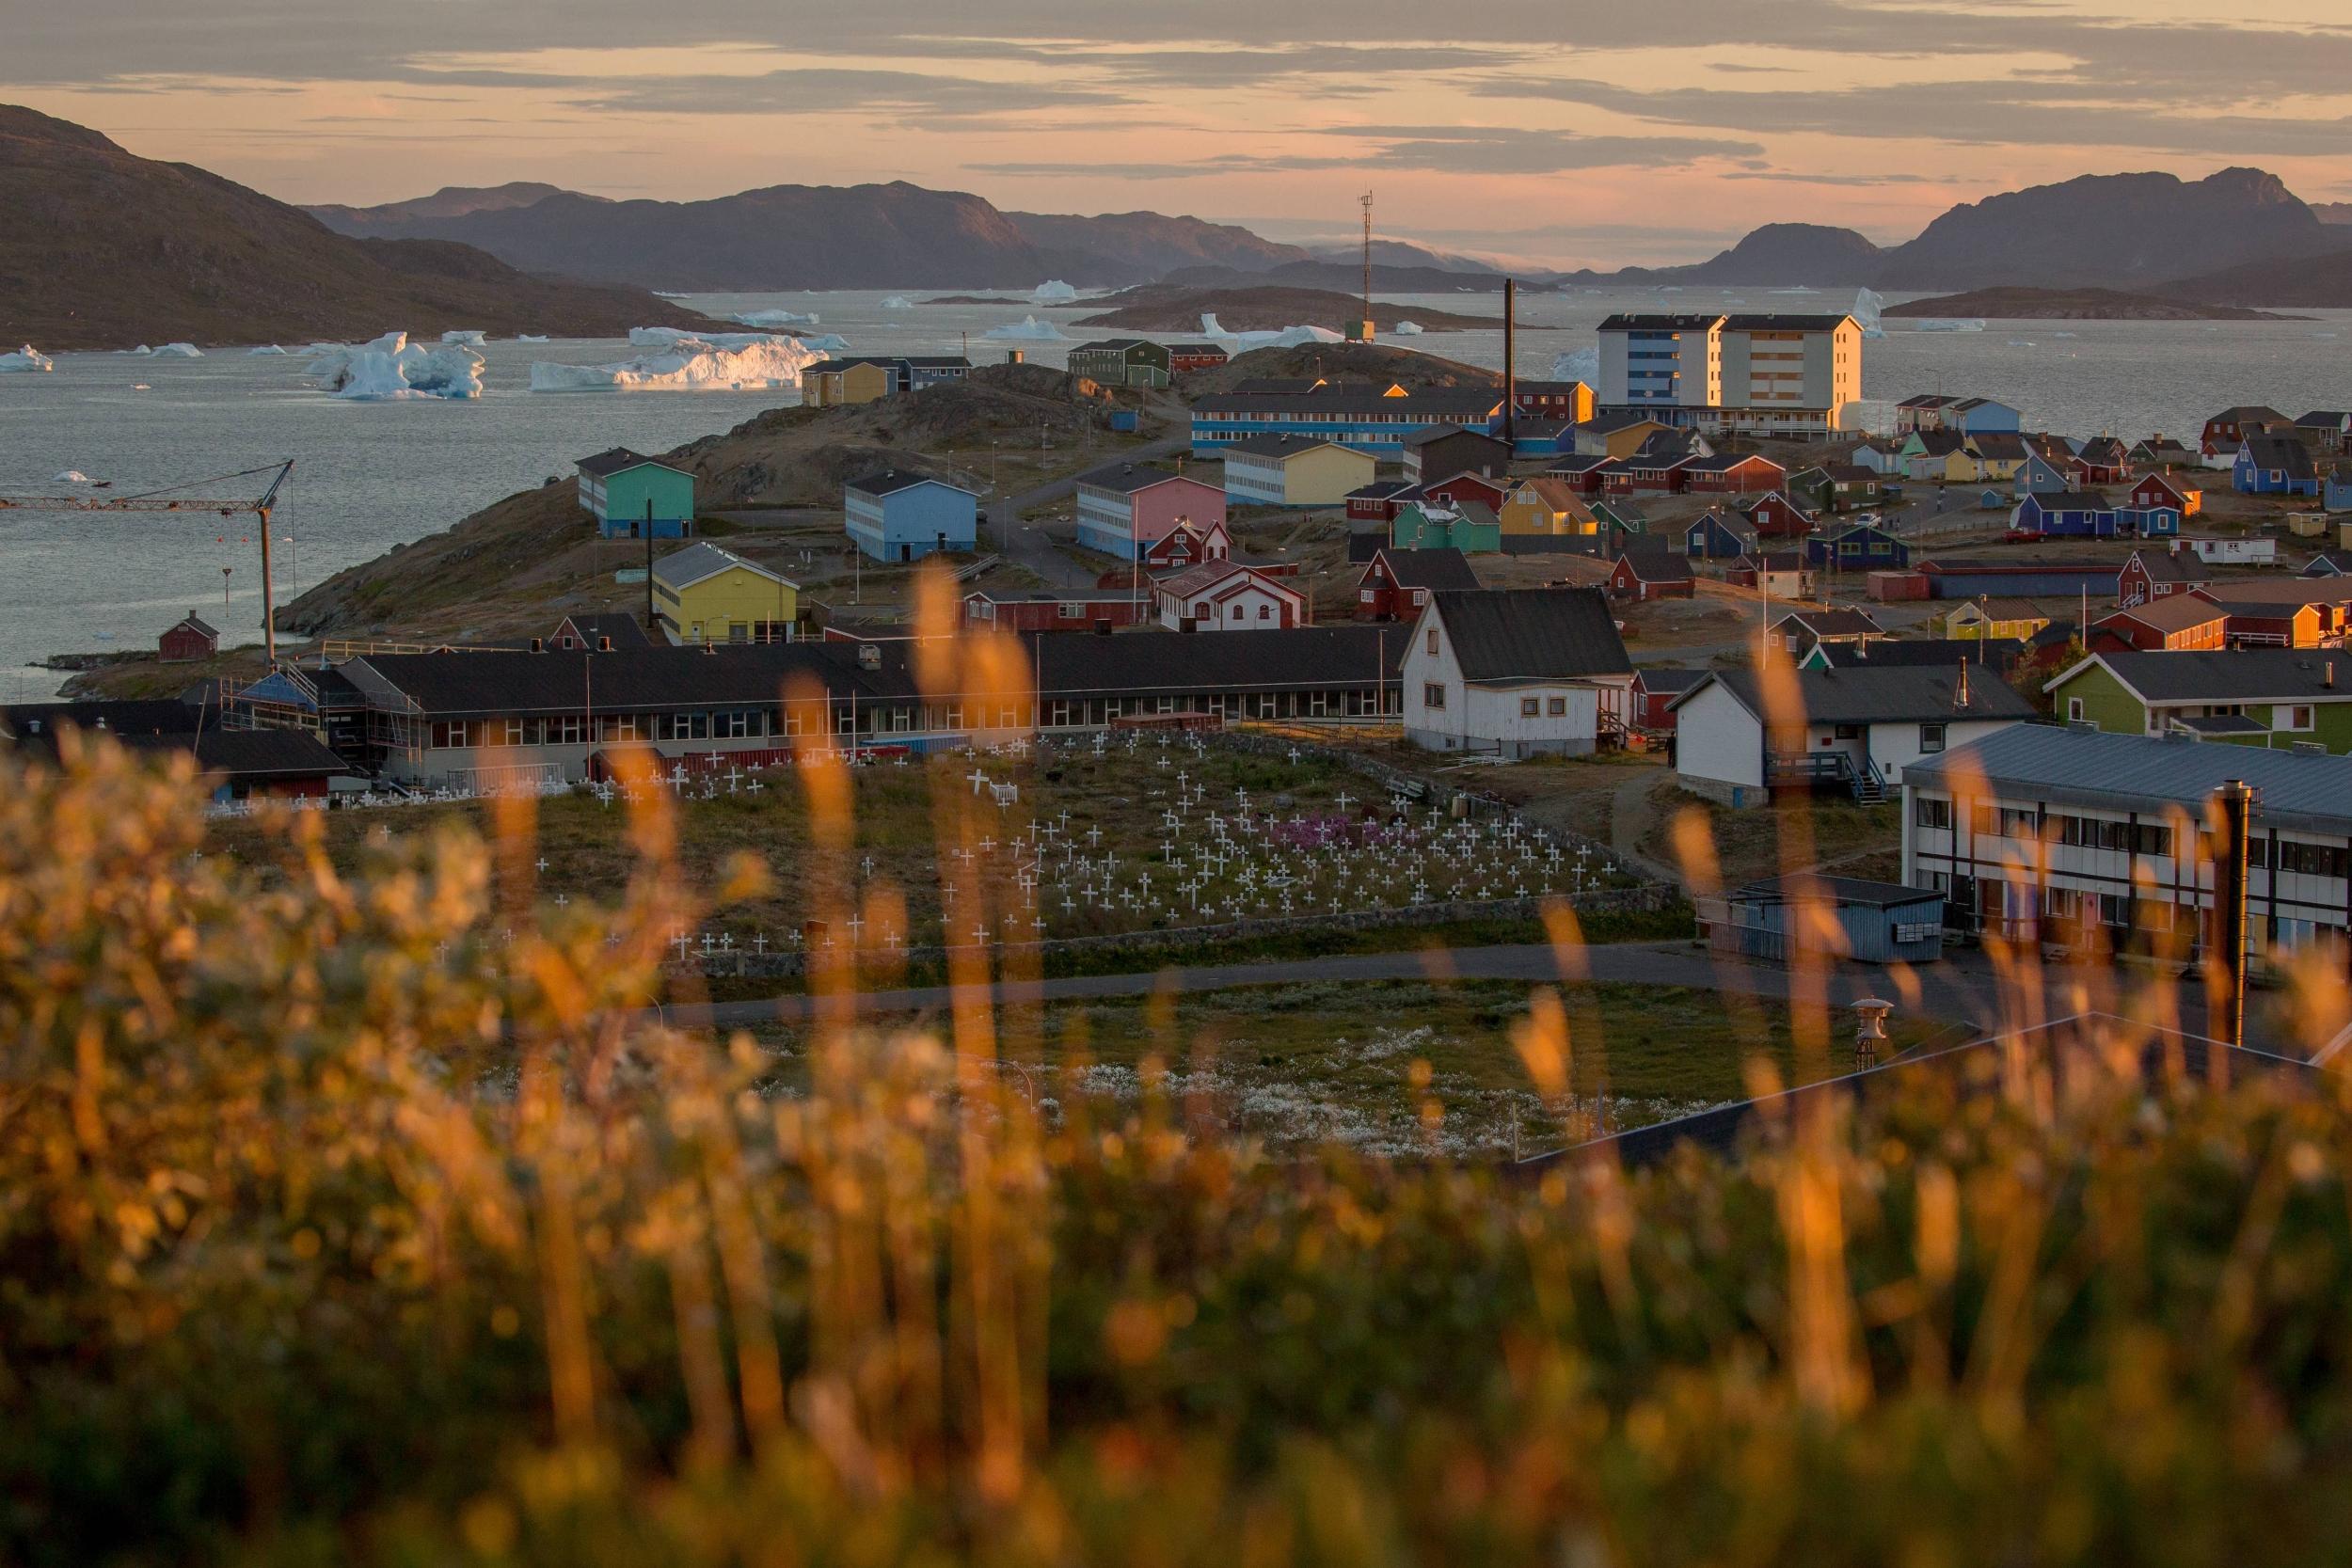 Sunset over Narsaq and the bay with icebergs in South Greenland. Sunset over Narsaq and the bay with icebergs in South Greenland. Photo by Mads Pihl